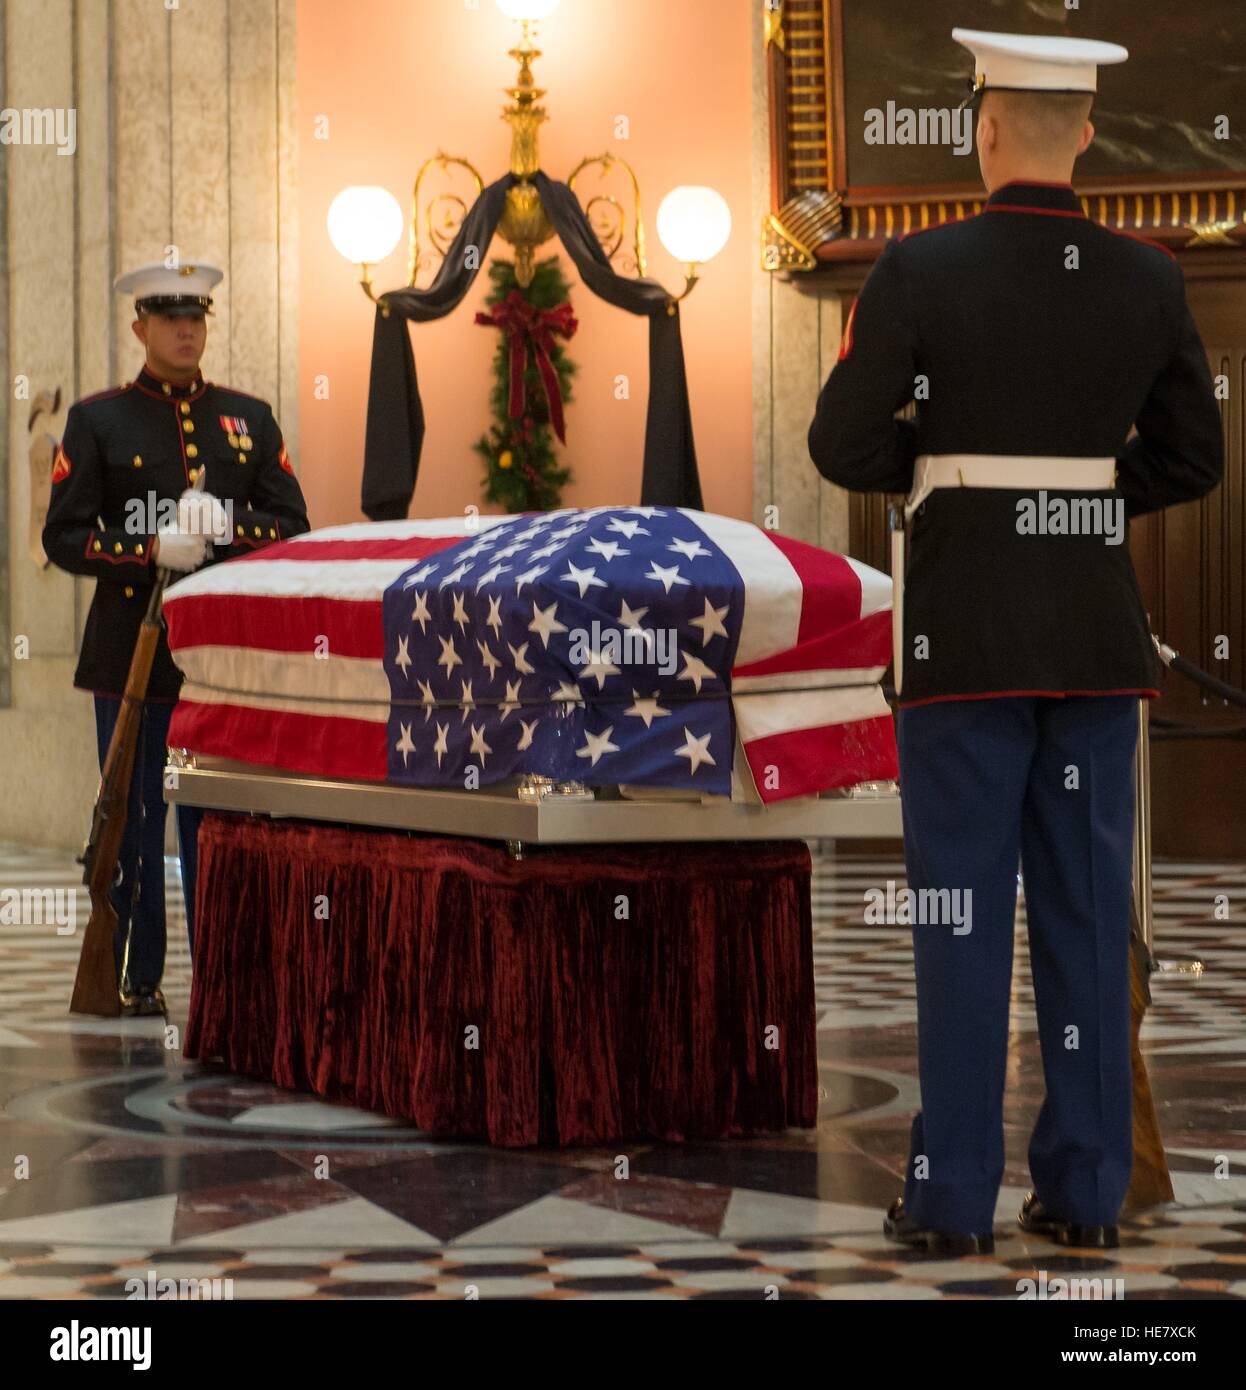 U.S. Marines stand guard by the casket of astronaut and former Senator John Glenn in repose at the Ohio Statehouse December 16, 2016 in Columbus, Ohio. The former Marine pilot, Senator and first man to orbit the earth died last week at the age of 95. Stock Photo